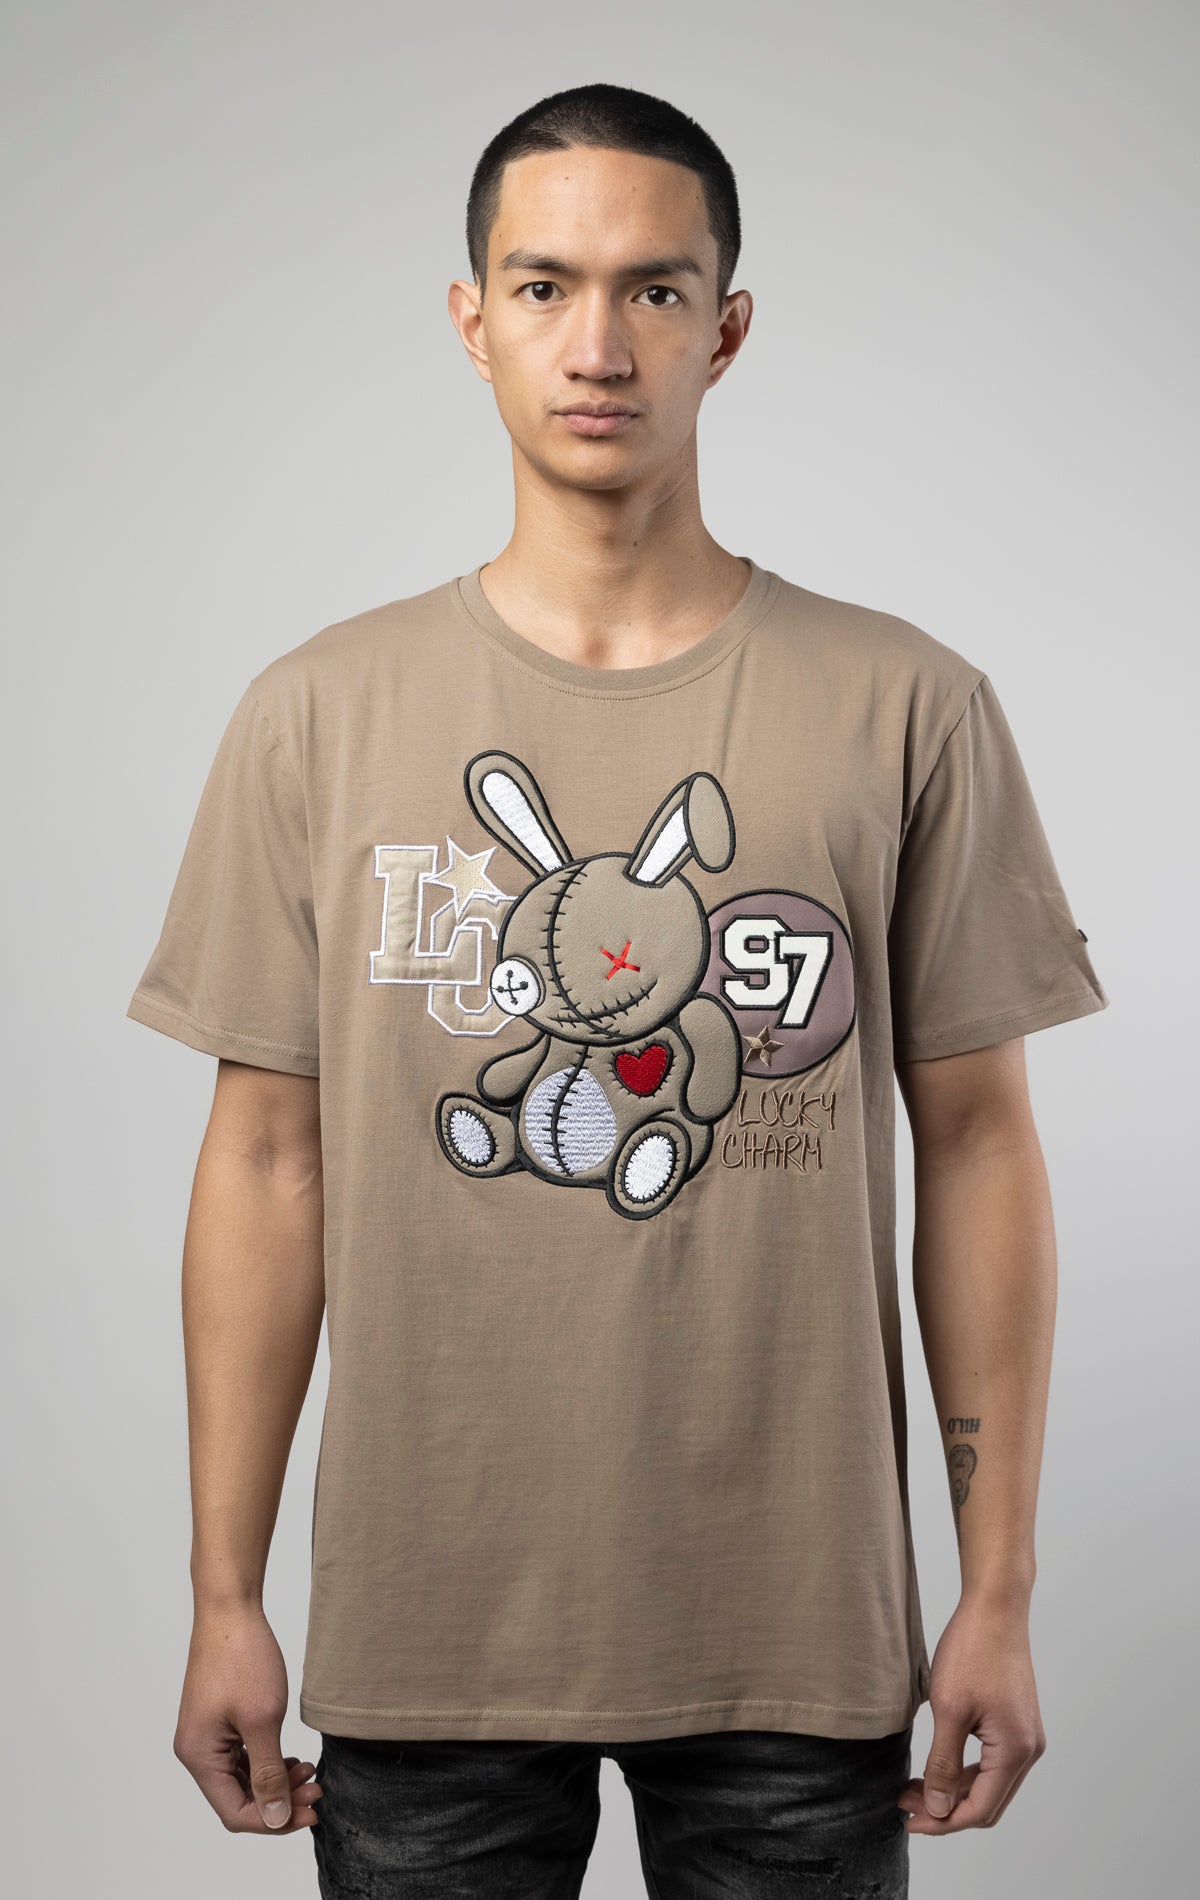 BKYS 'LC 97' graphic stitched and printed on a premium 95% cotton & 5% spandex slim fit khaki t-shirt.